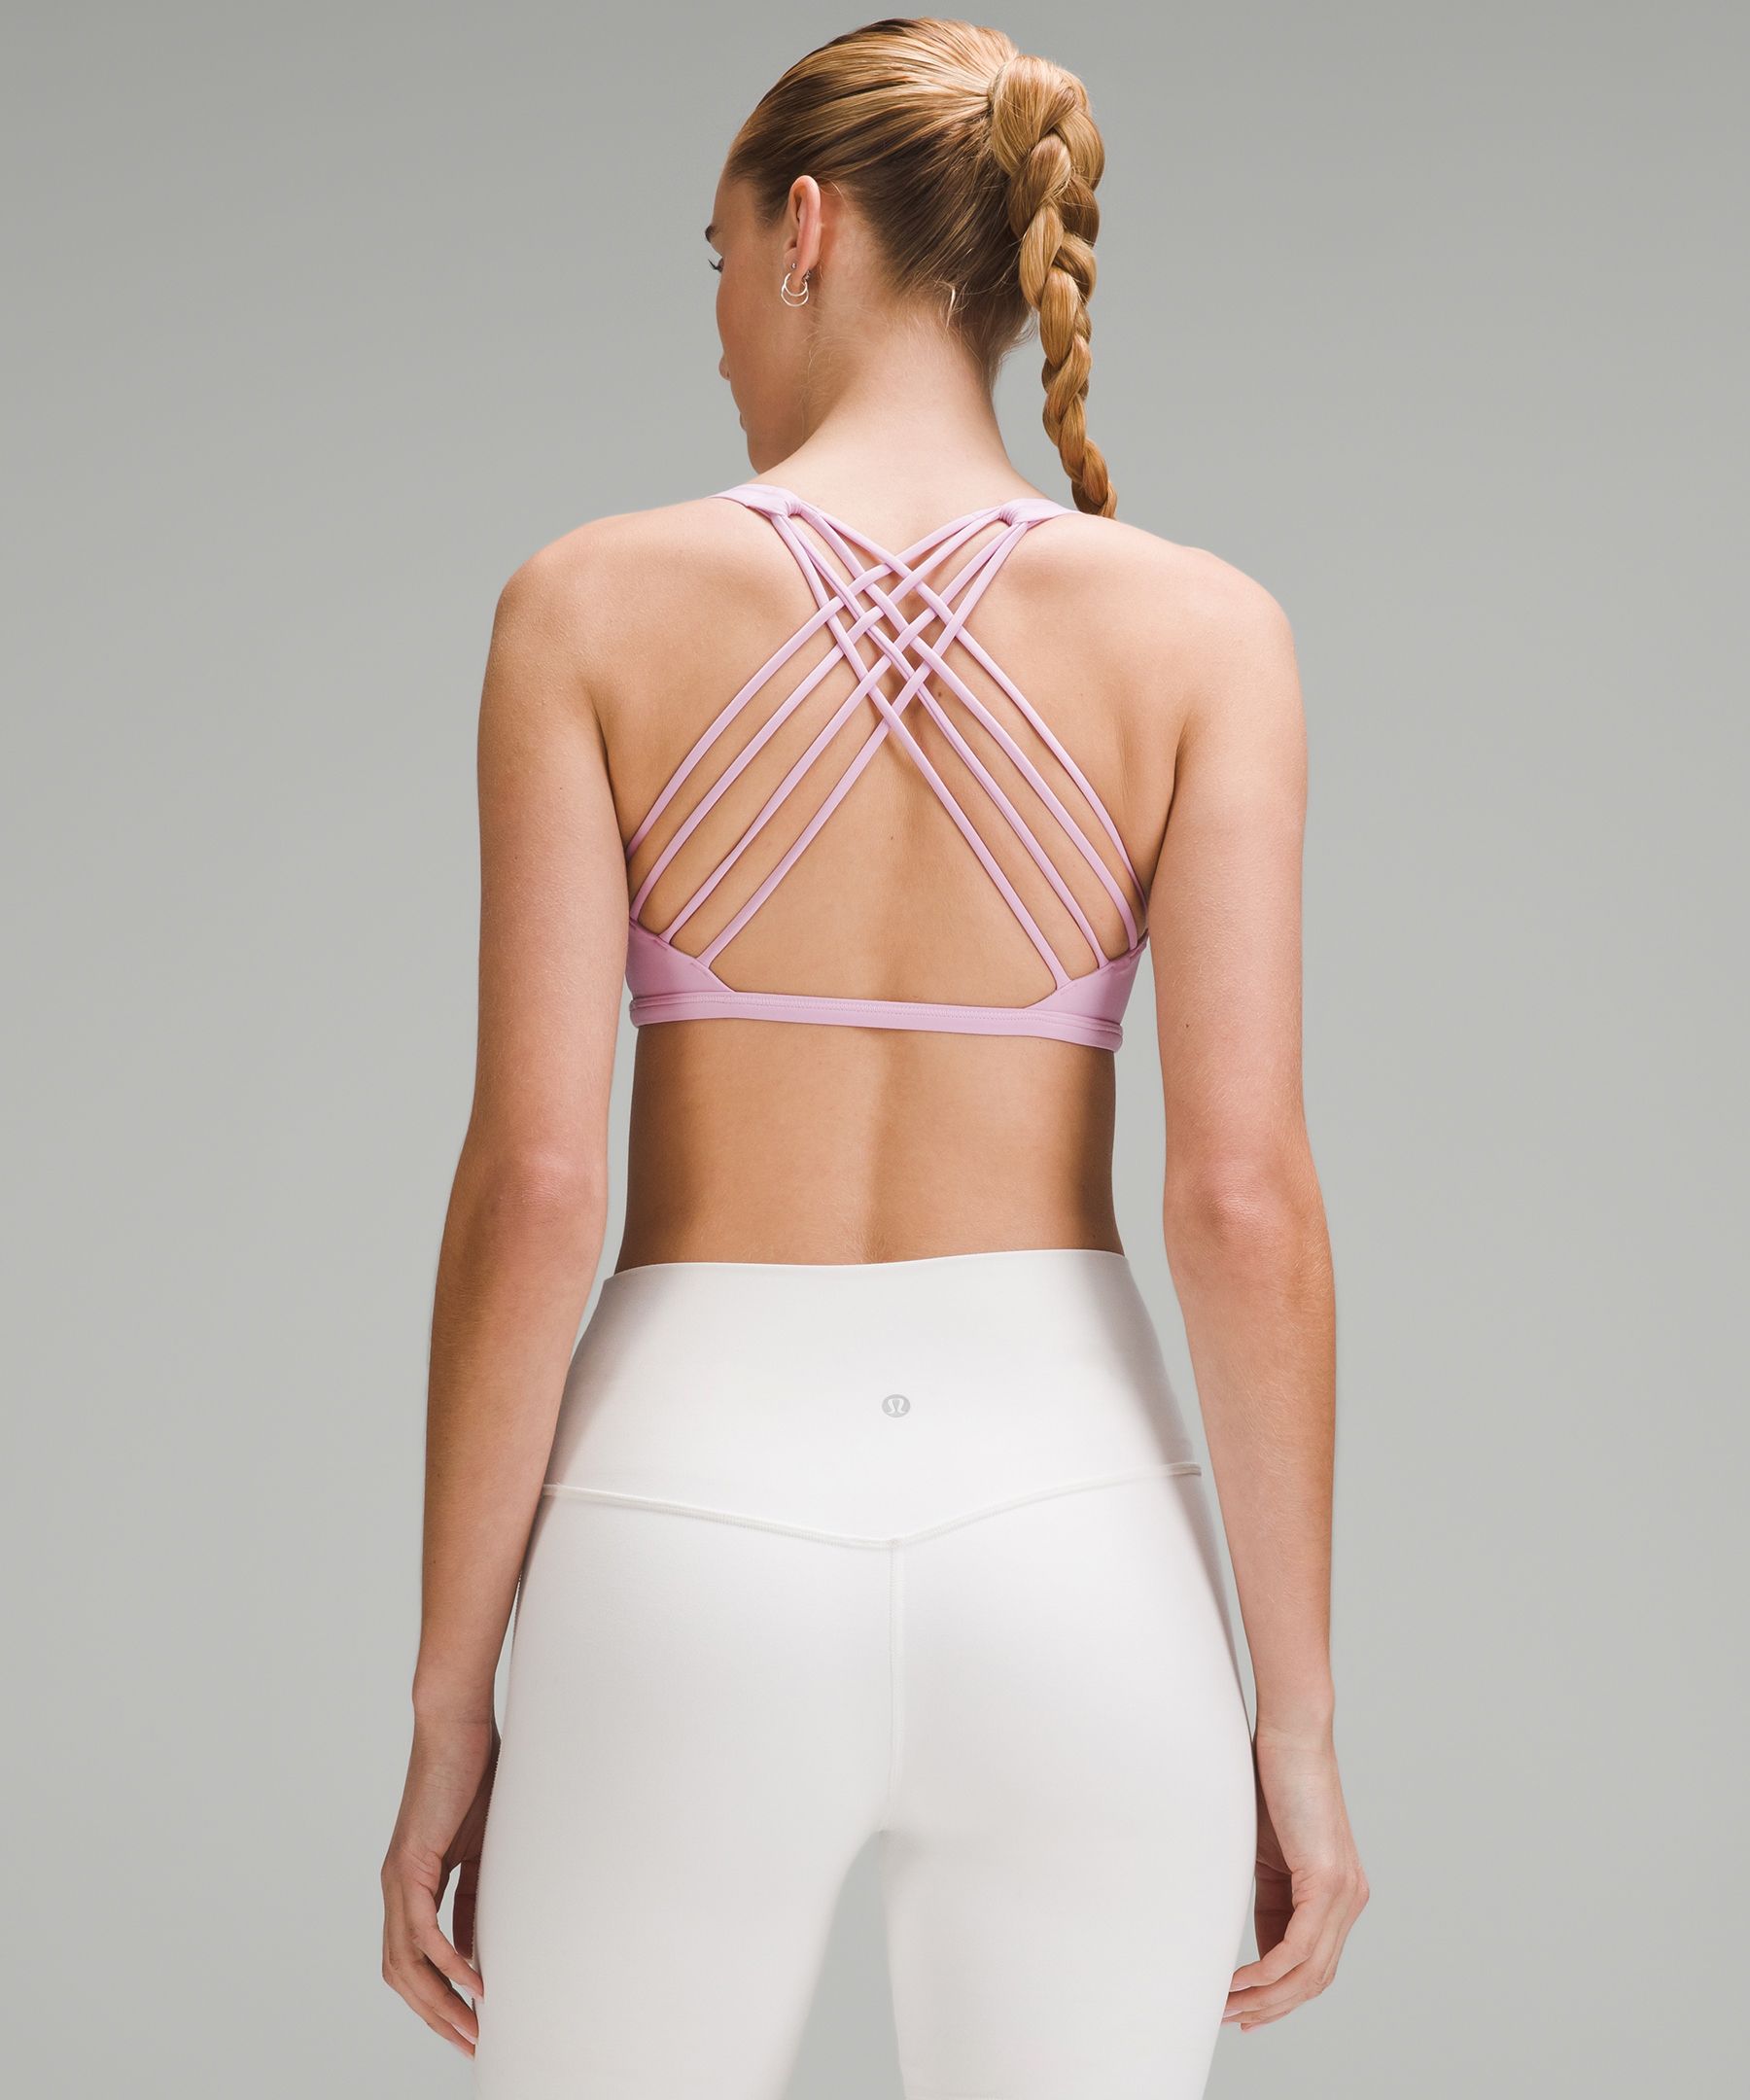 This Clip-Back Lululemon Bra Is So Easy to Put On